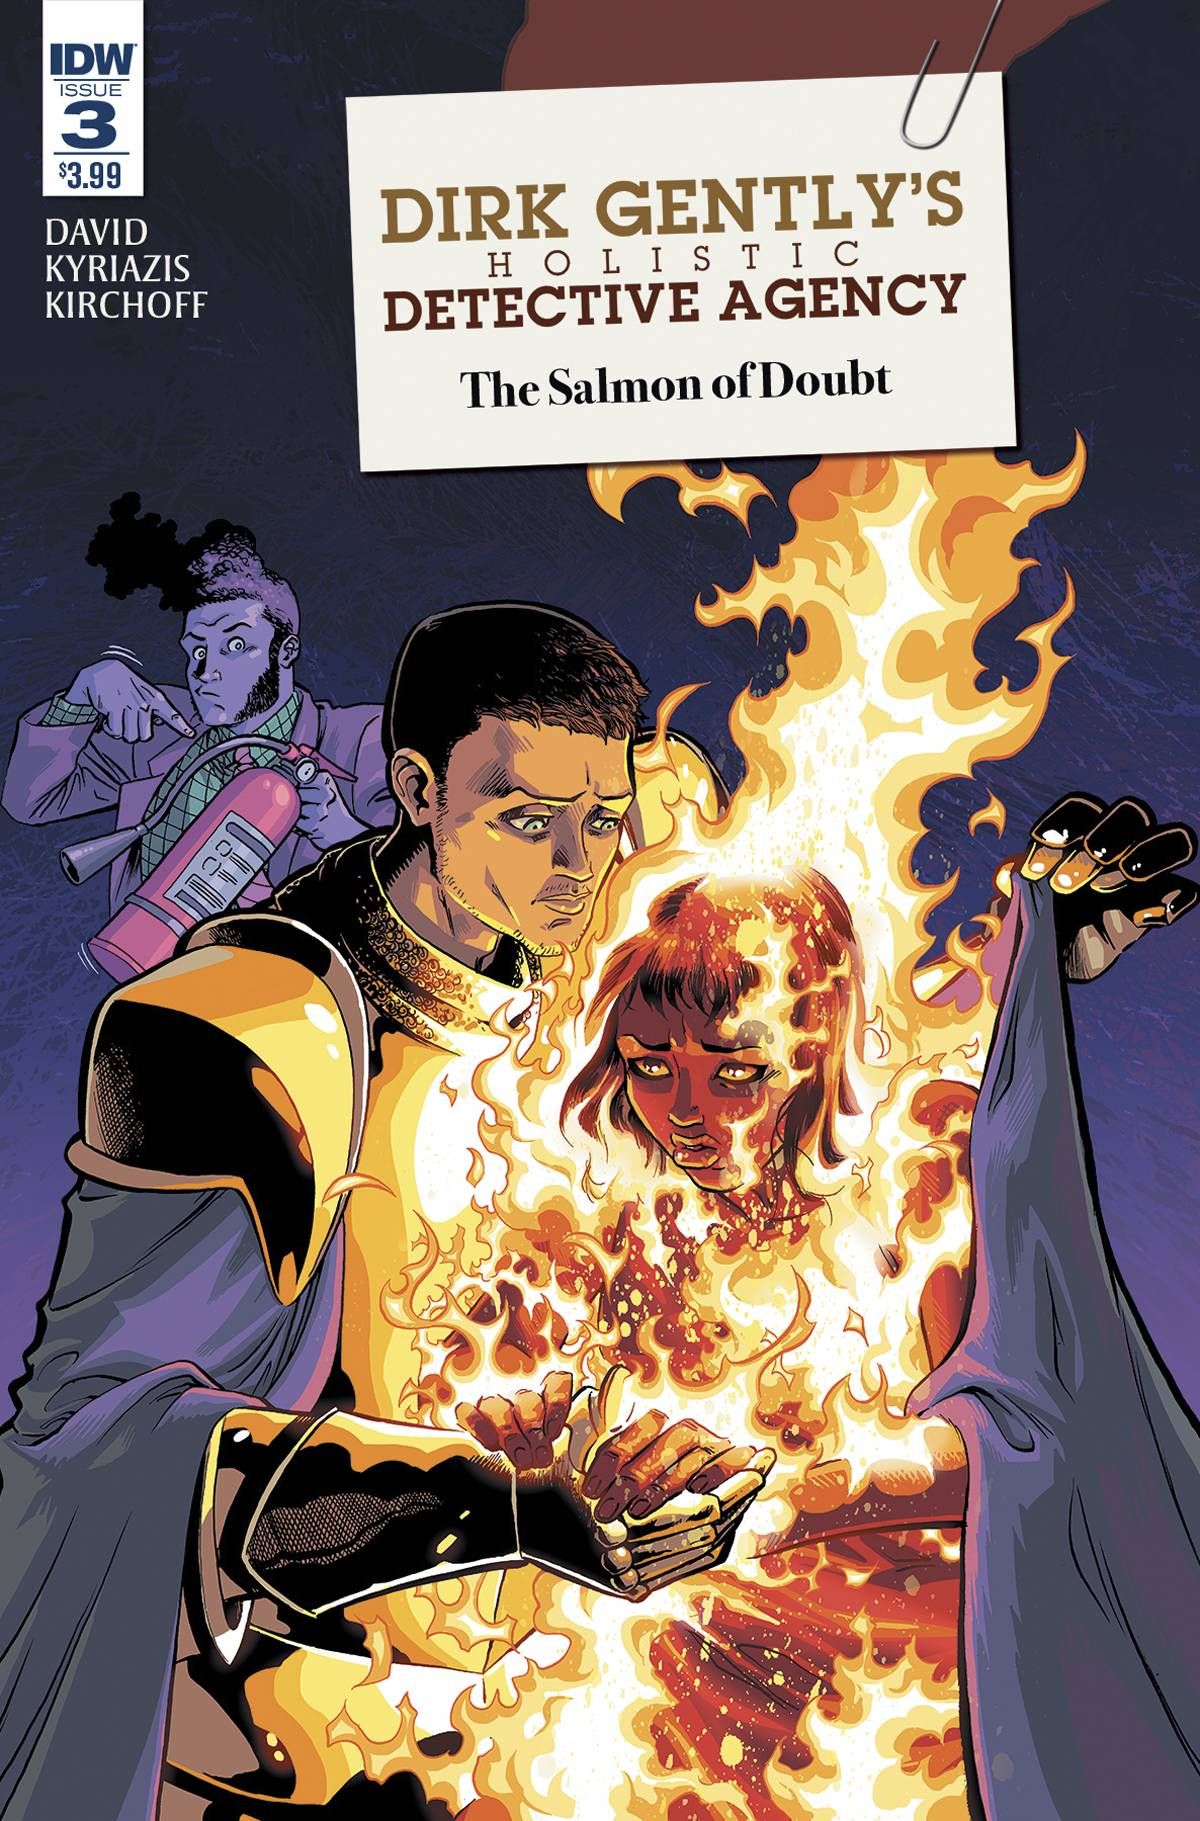 Dirk Gently's Holistic Detective Agency: Salmon of Doubt #3 Comic